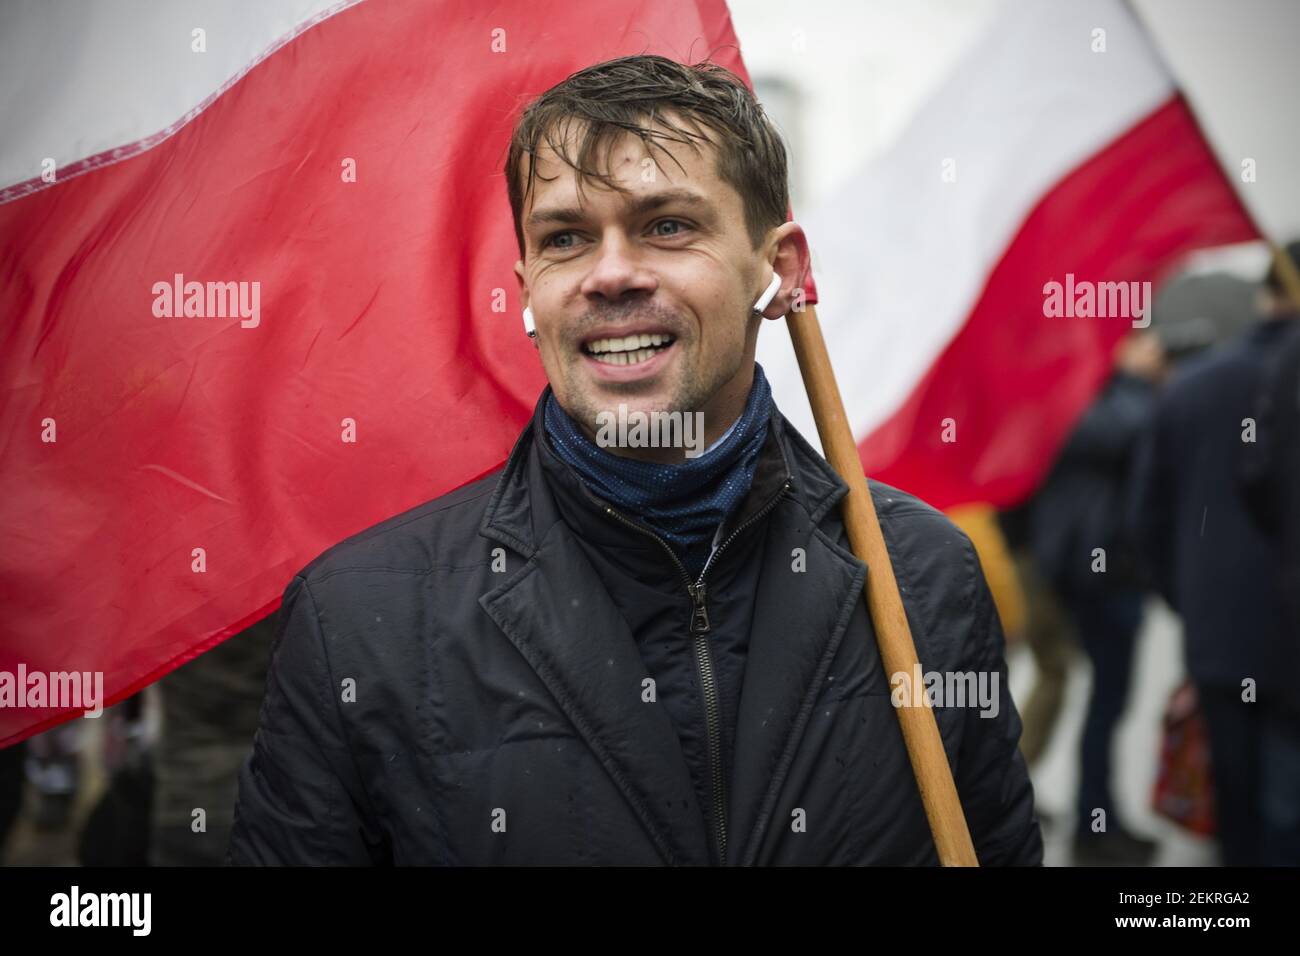 Michal Kolodziejczak waving the Polish flag during the march. To oppose the  so-called "Five for animals" act (Piatka dla zwierzat), Agrounia, the  farmers' organisation lead by Michal Kolodziejczak marched through the  streets,